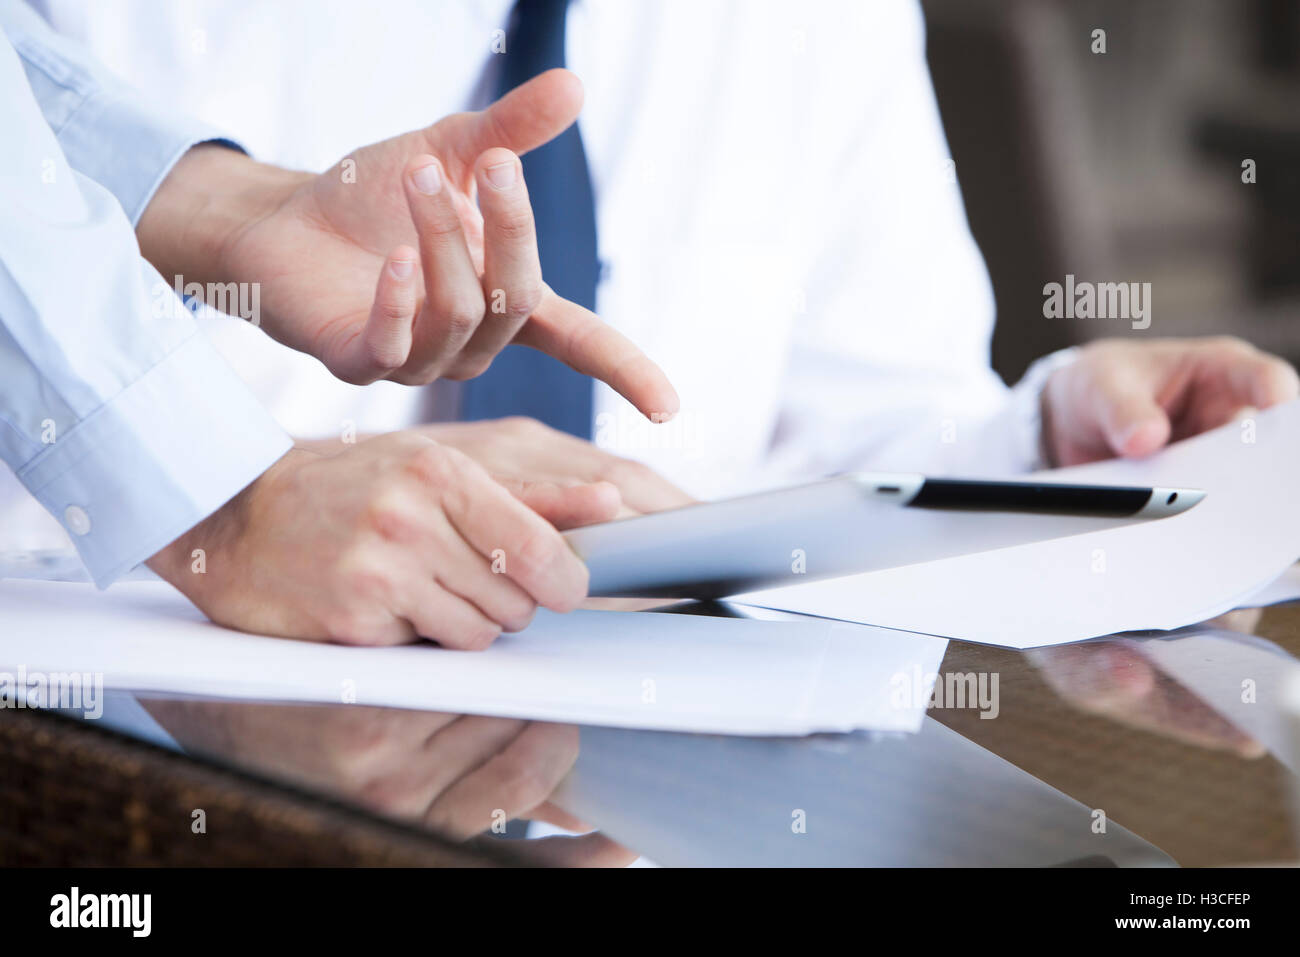 Businessman showing colleague how to use digital tablet Stock Photo